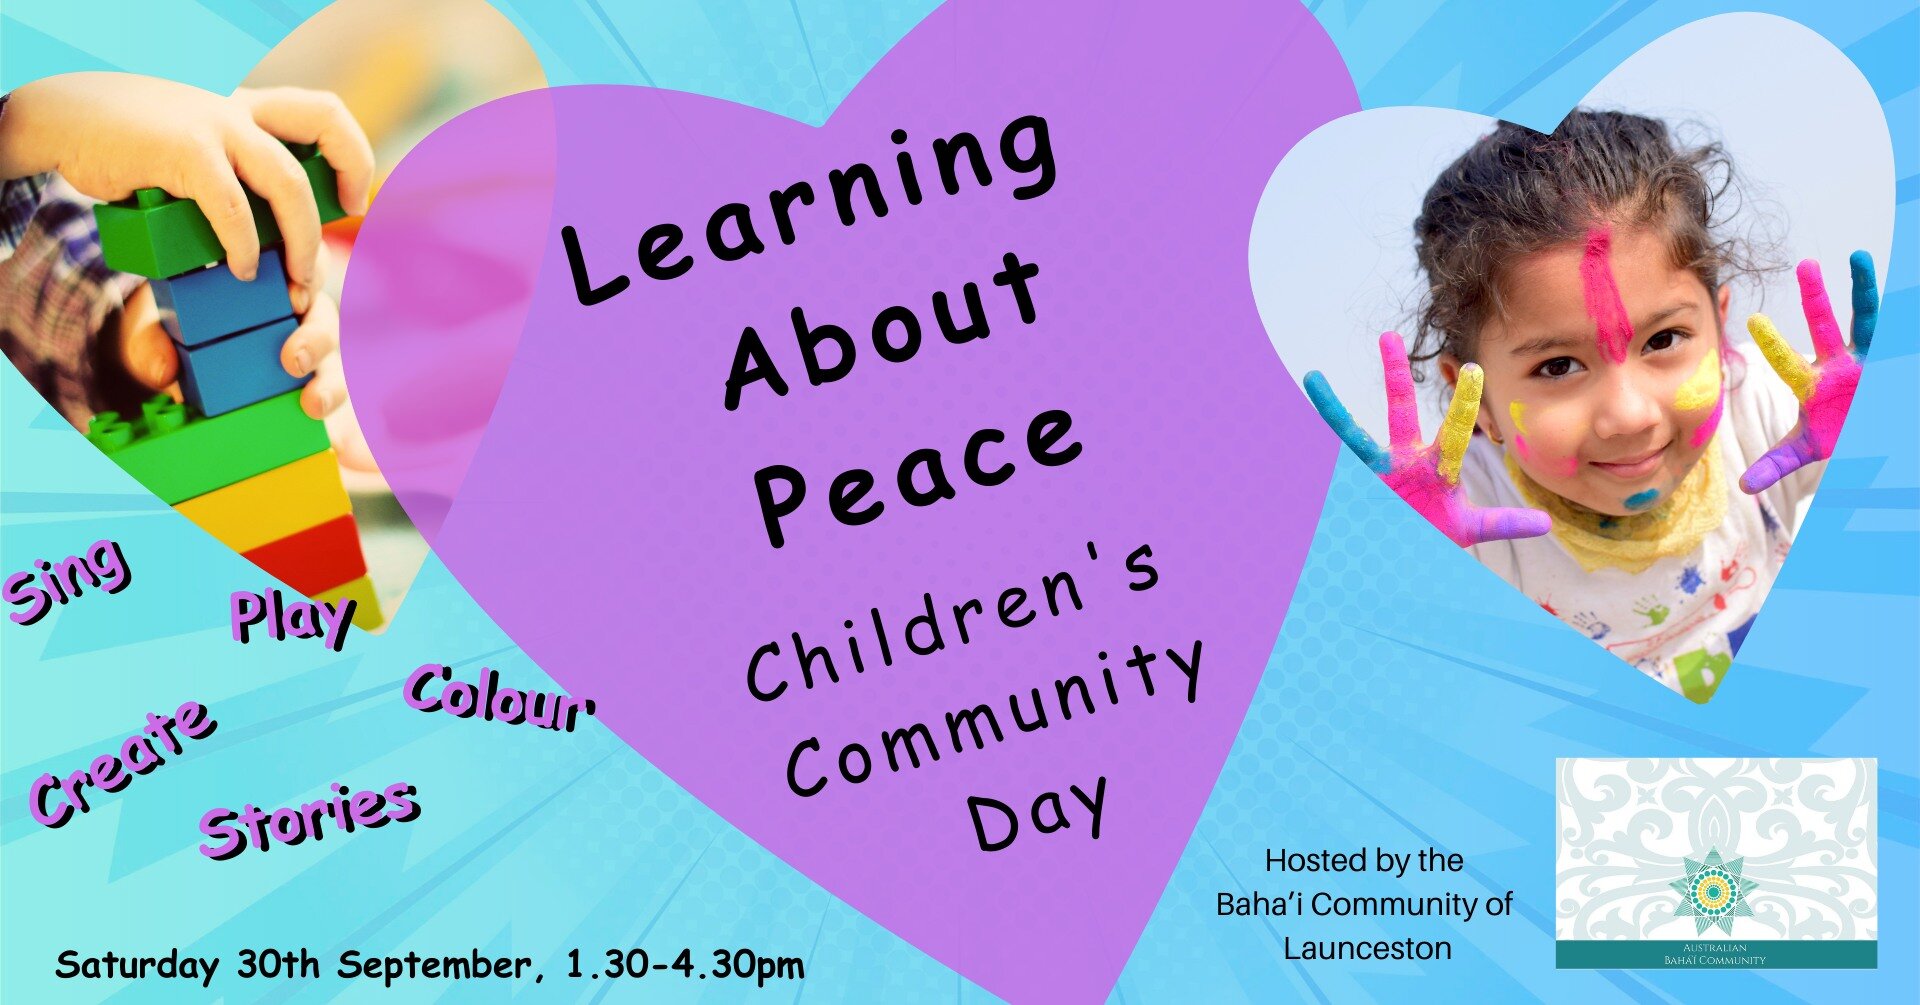 Get the holidays off to a fun start for the little people in your life. 

Learning About Peace- the Children's Community Day.
Today at 1.30pm at the Northern Suburbs Community Centre
49 George Town Road.

Hosted by Baha'i Community of Launceston
http